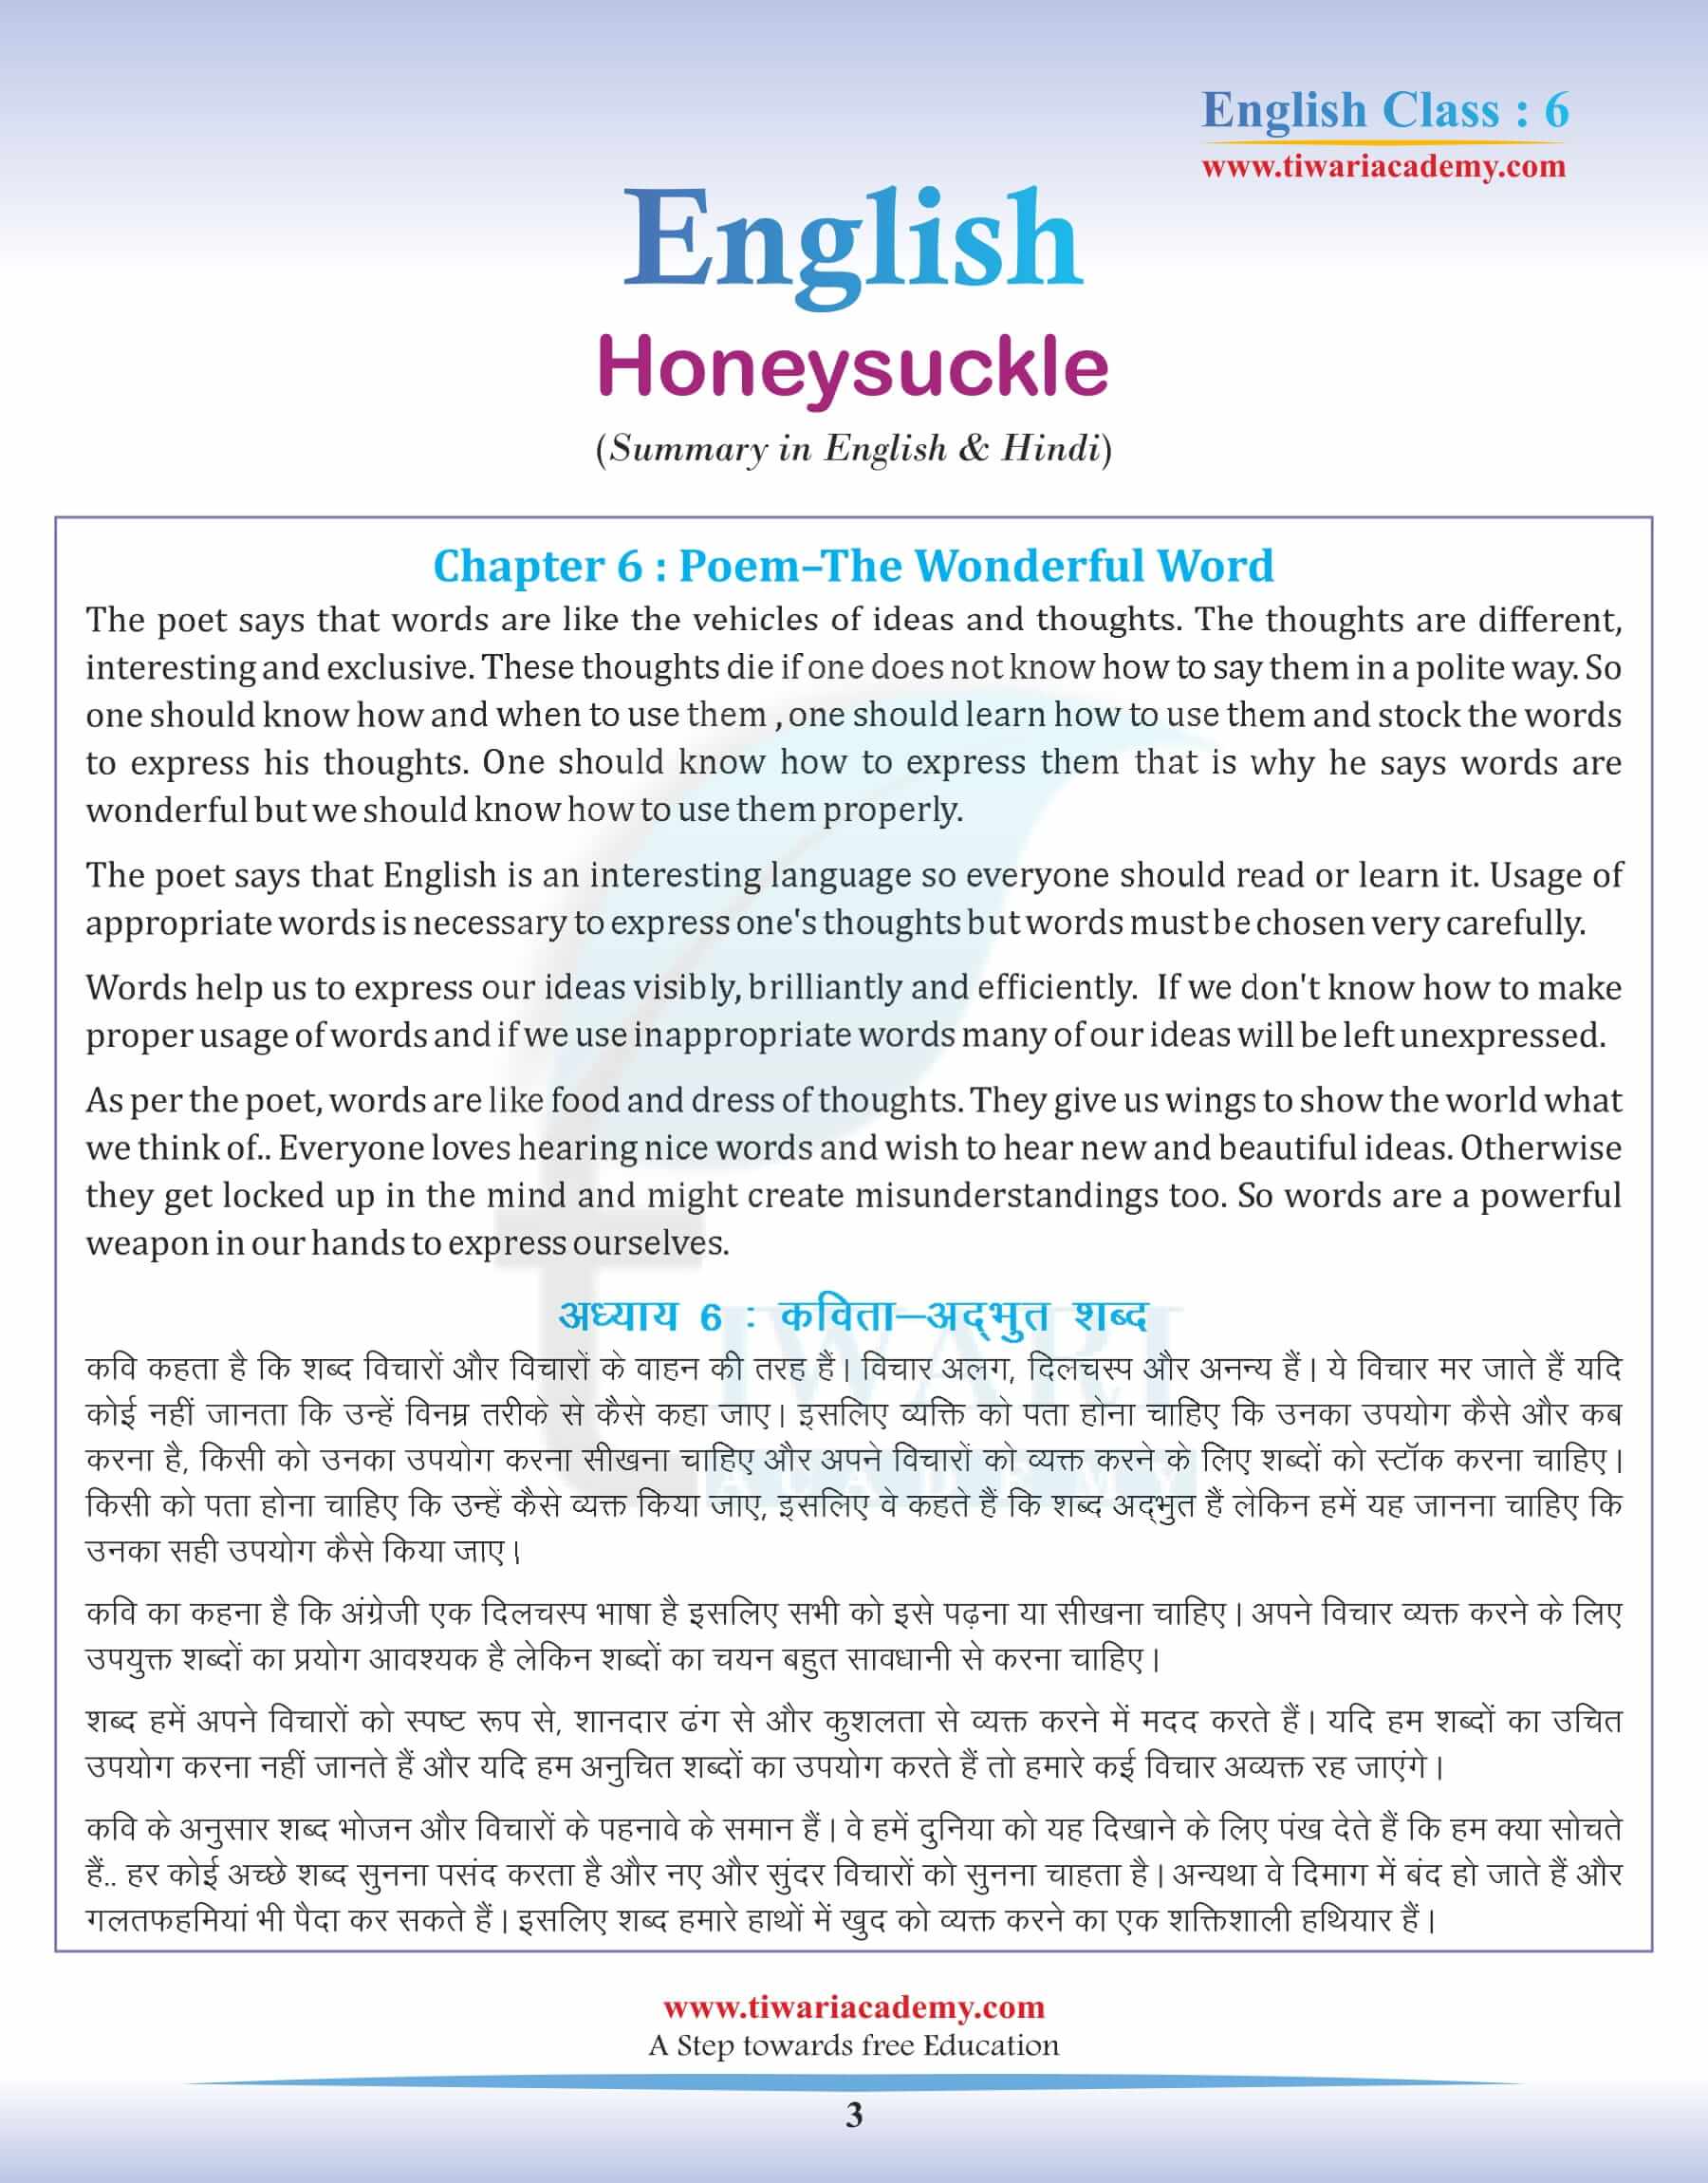 Class 6 English Chapter 6 Summary in Hindi and English